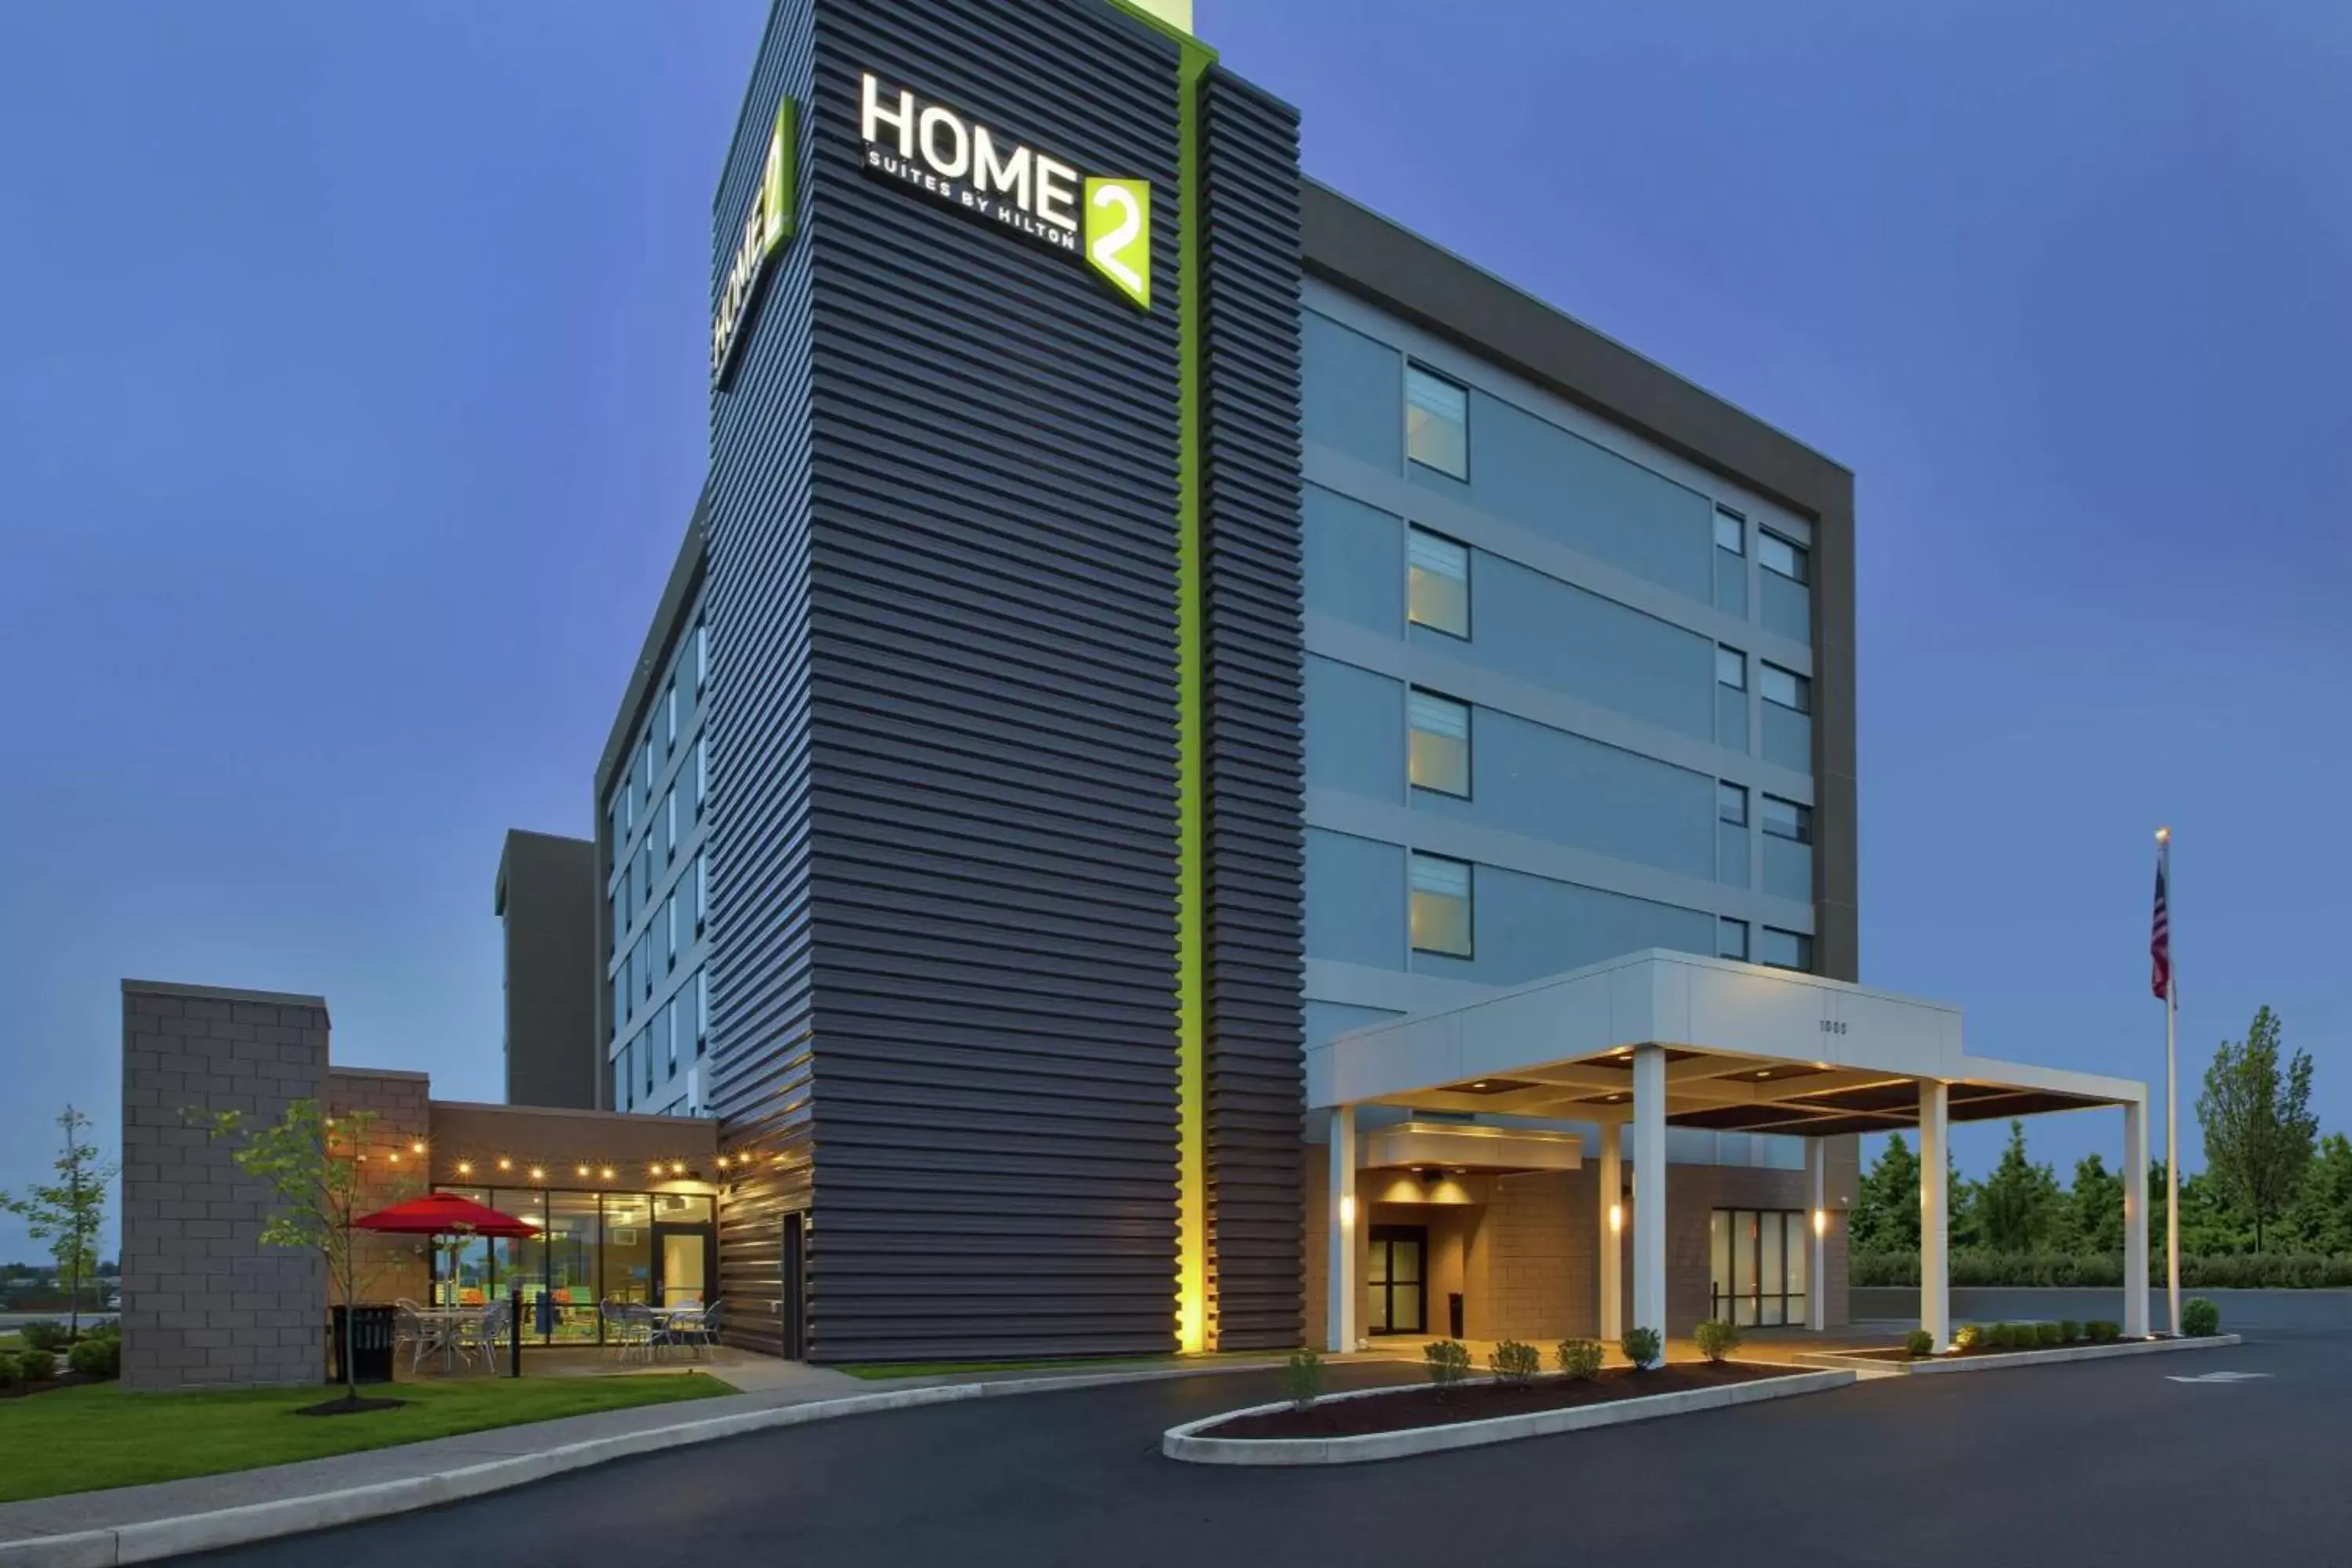 Property Building in Home2 Suites By Hilton Pittsburgh Area Beaver Valley